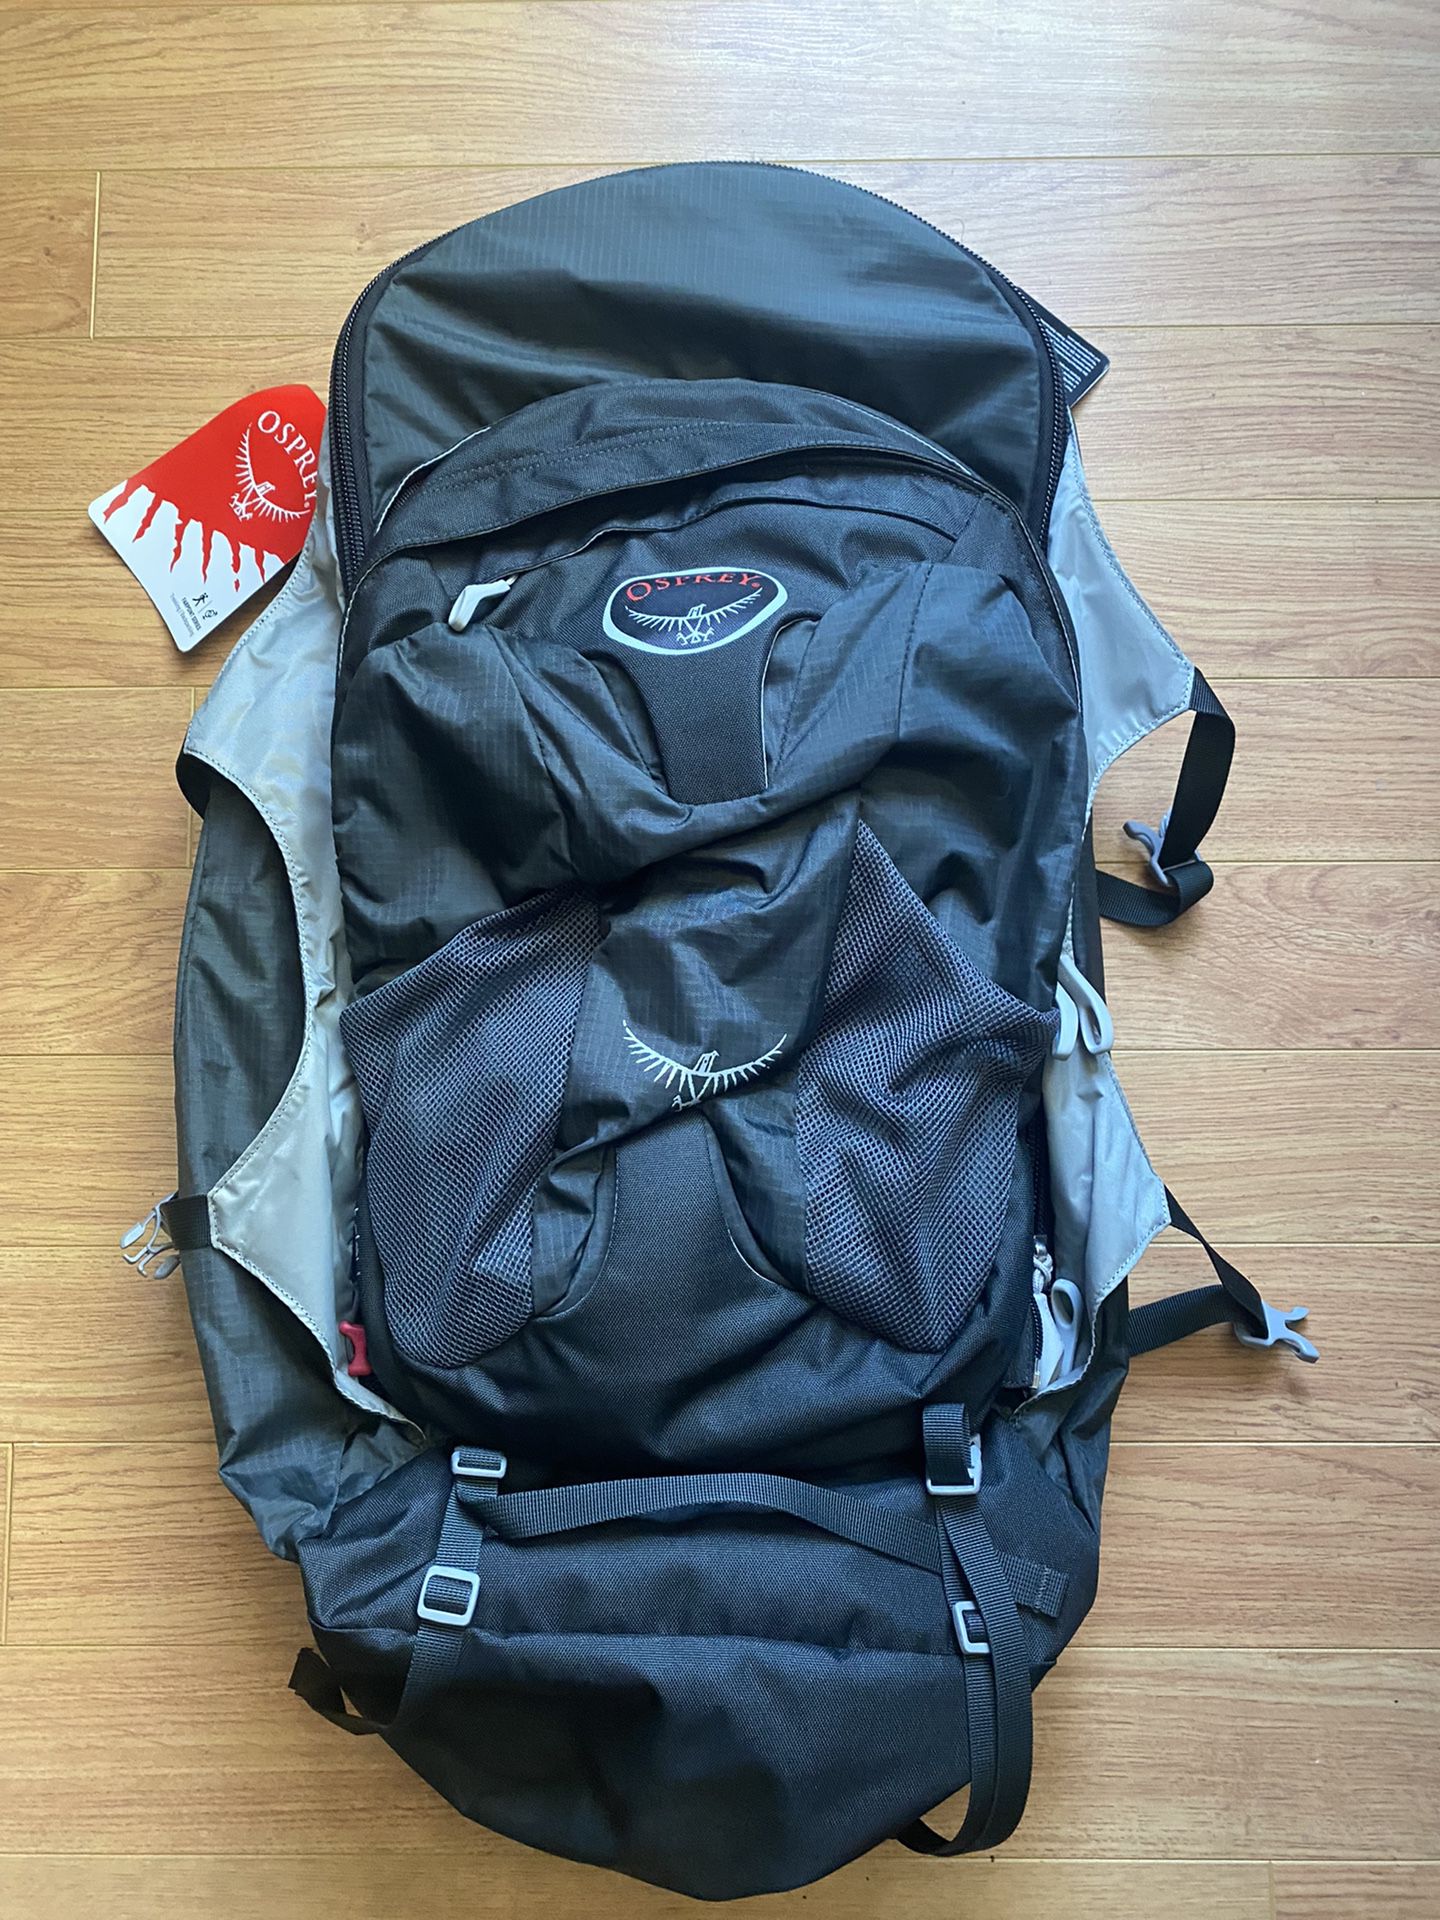 Osprey Farpoint 70 - Travel Backpack